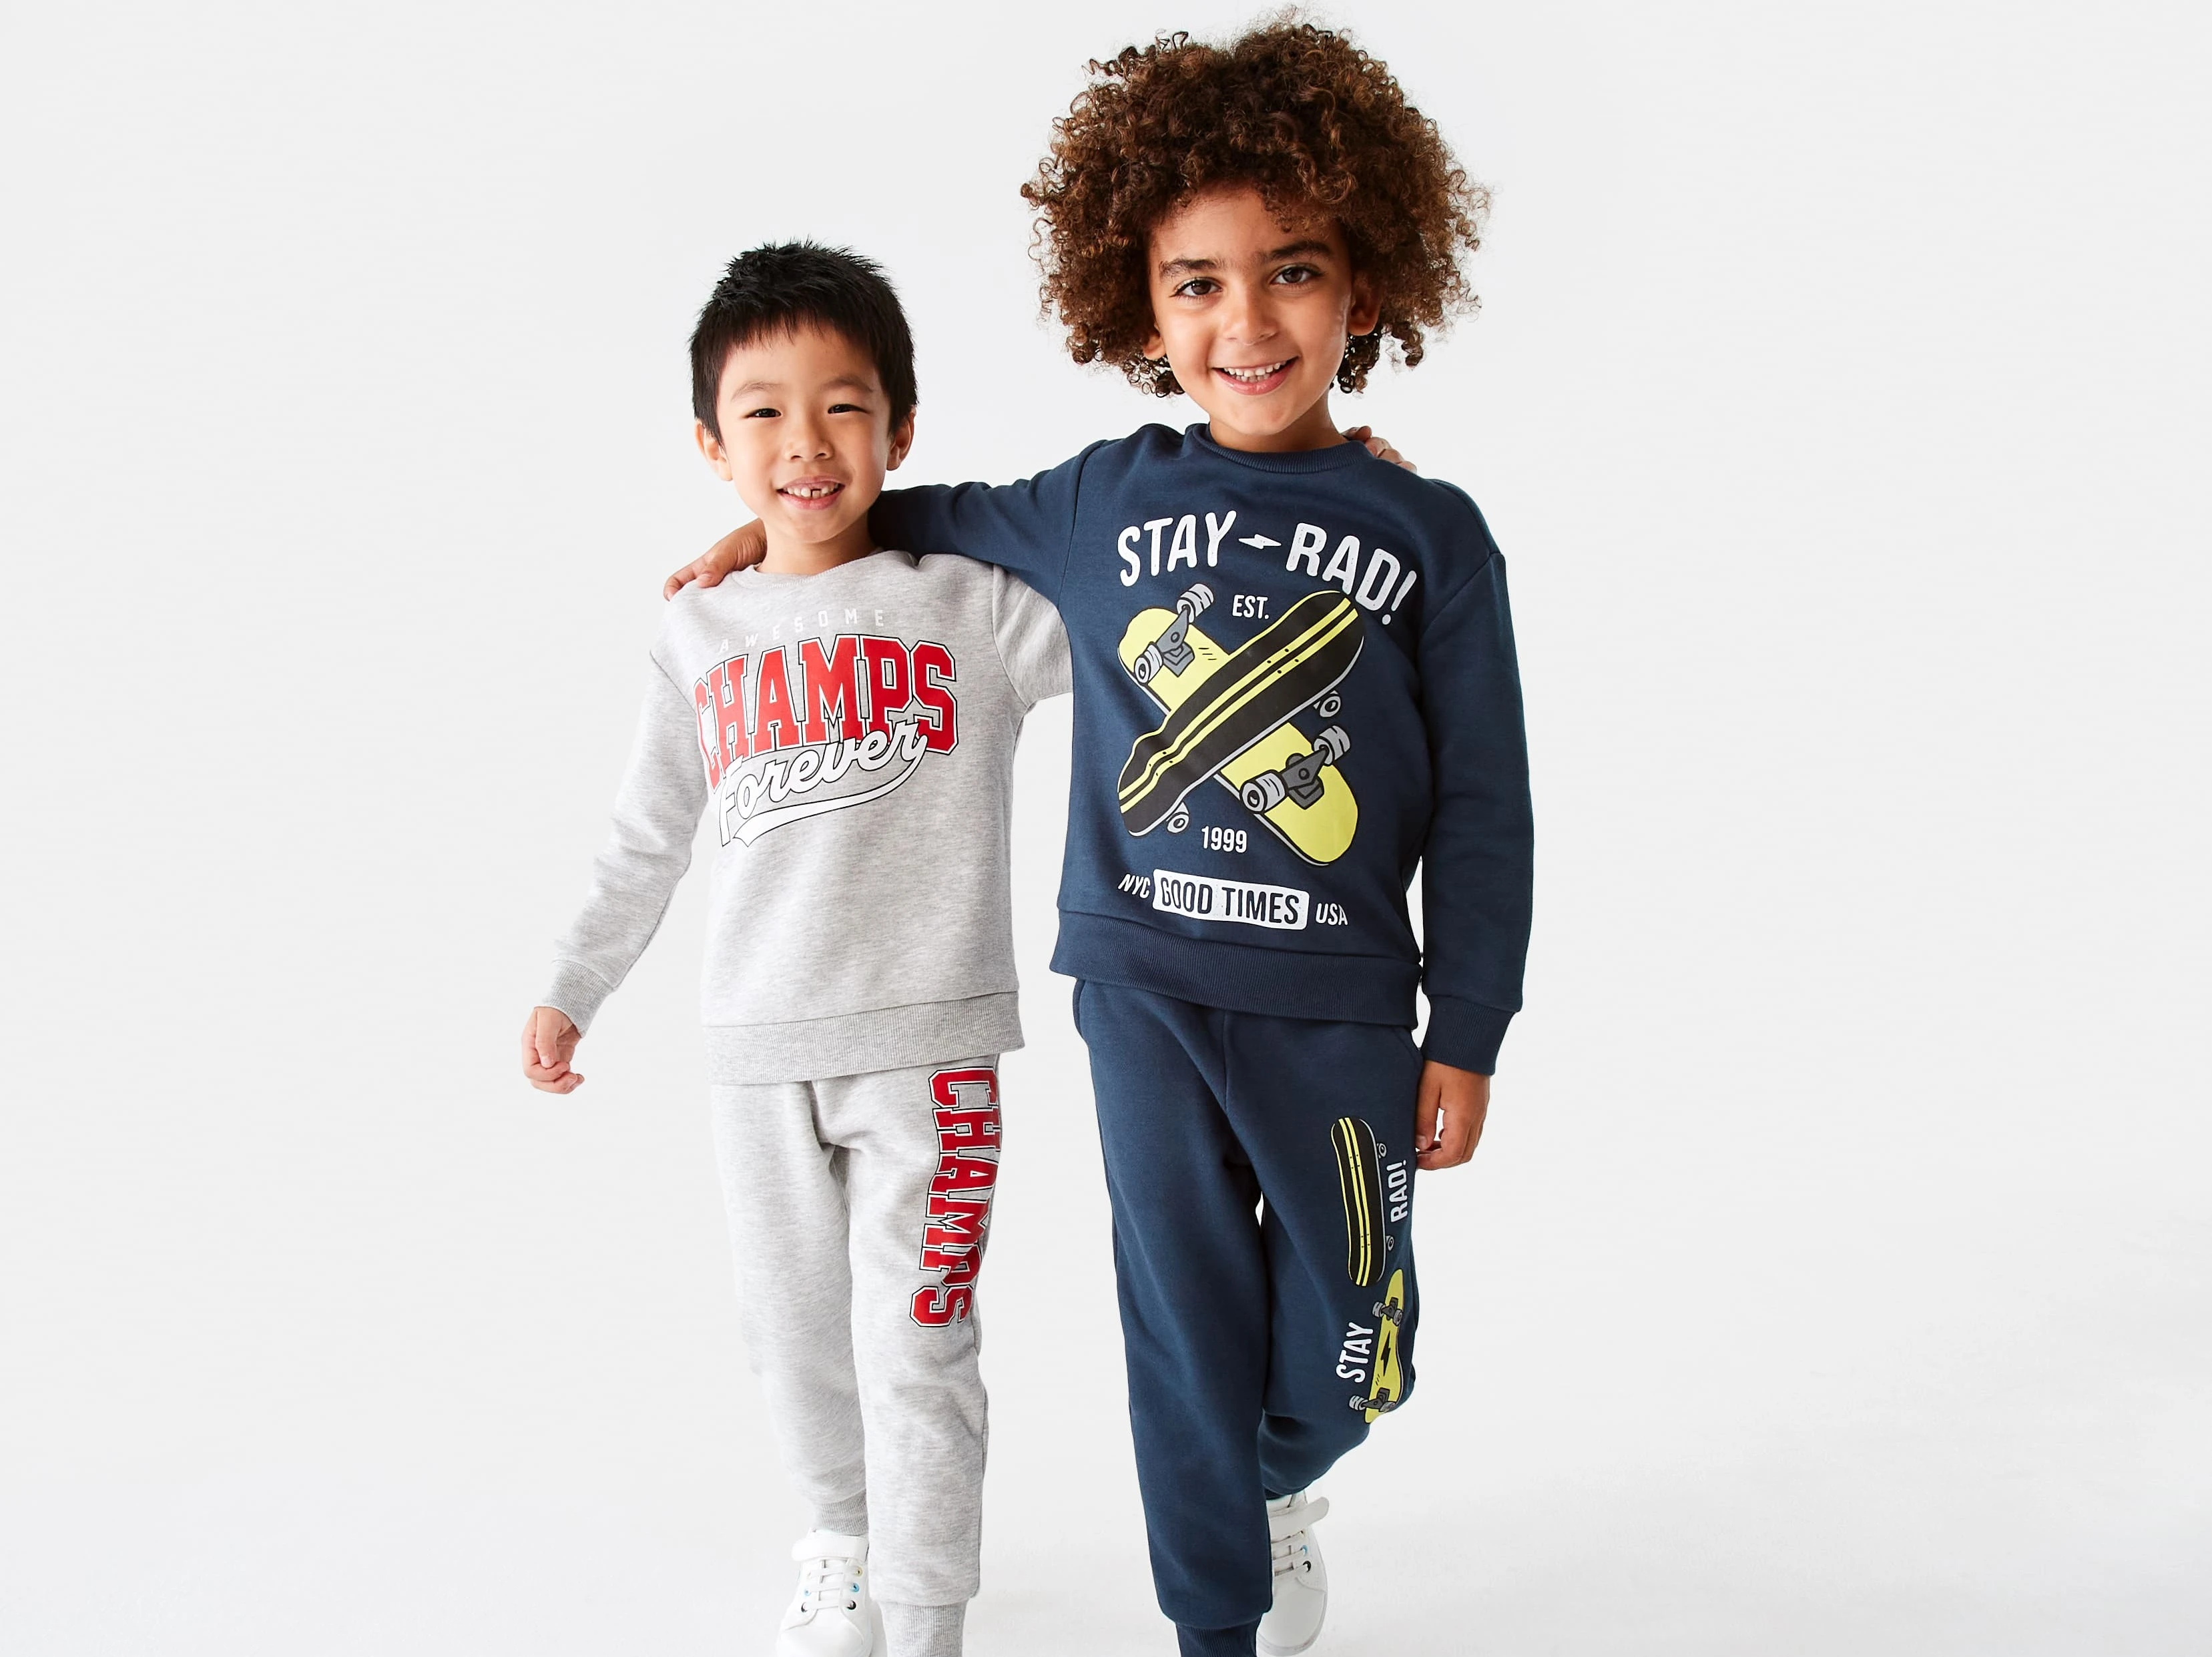 Shop for Kids Clothing online and Instore - Kmart